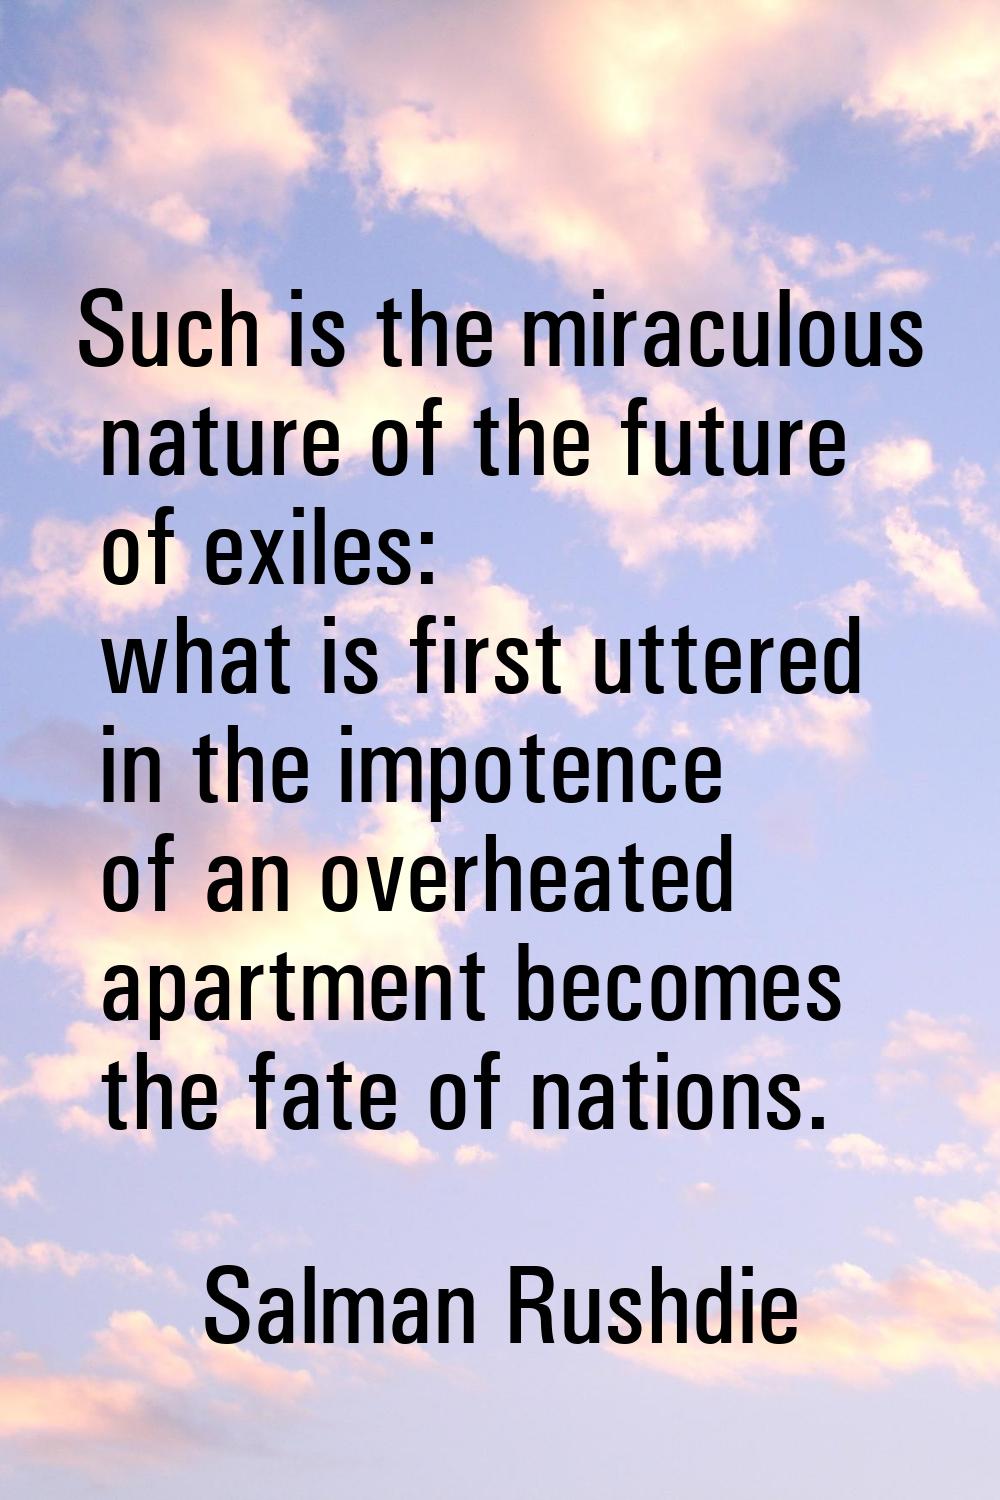 Such is the miraculous nature of the future of exiles: what is first uttered in the impotence of an